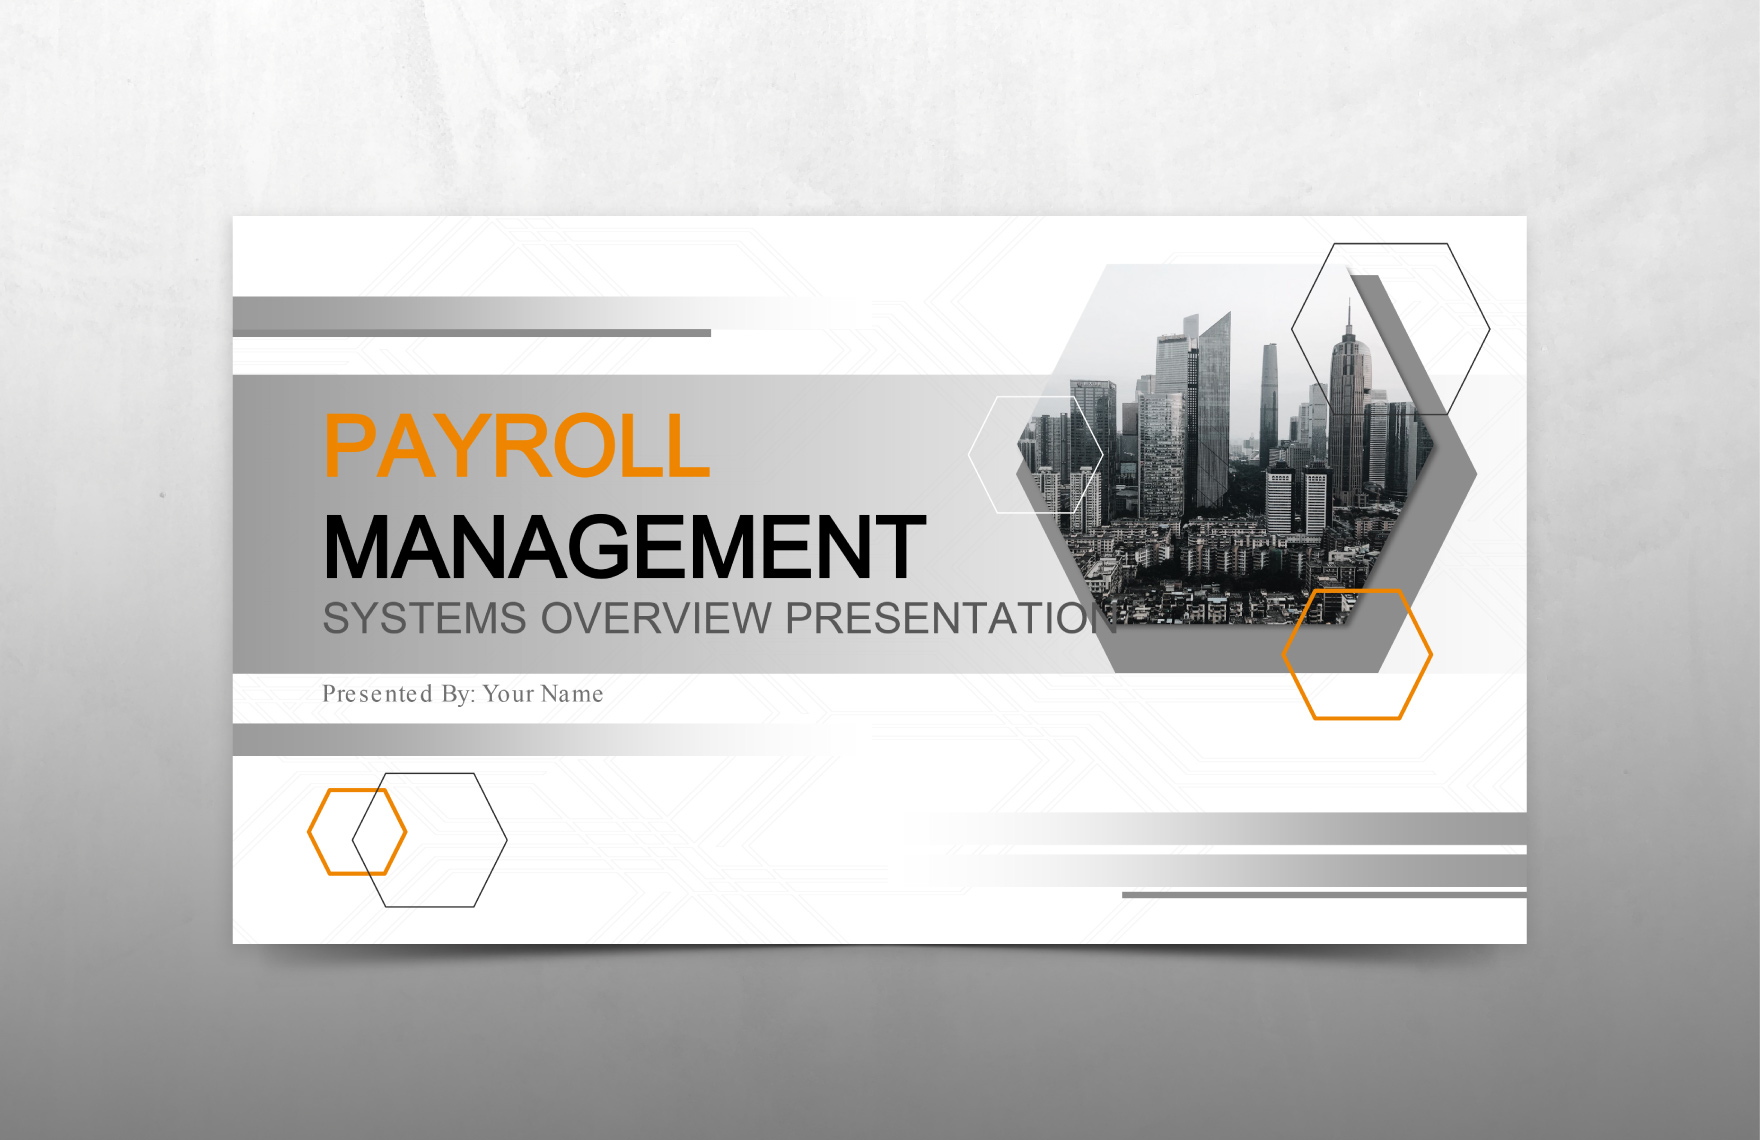 Payroll Management Systems Overview Presentation Template